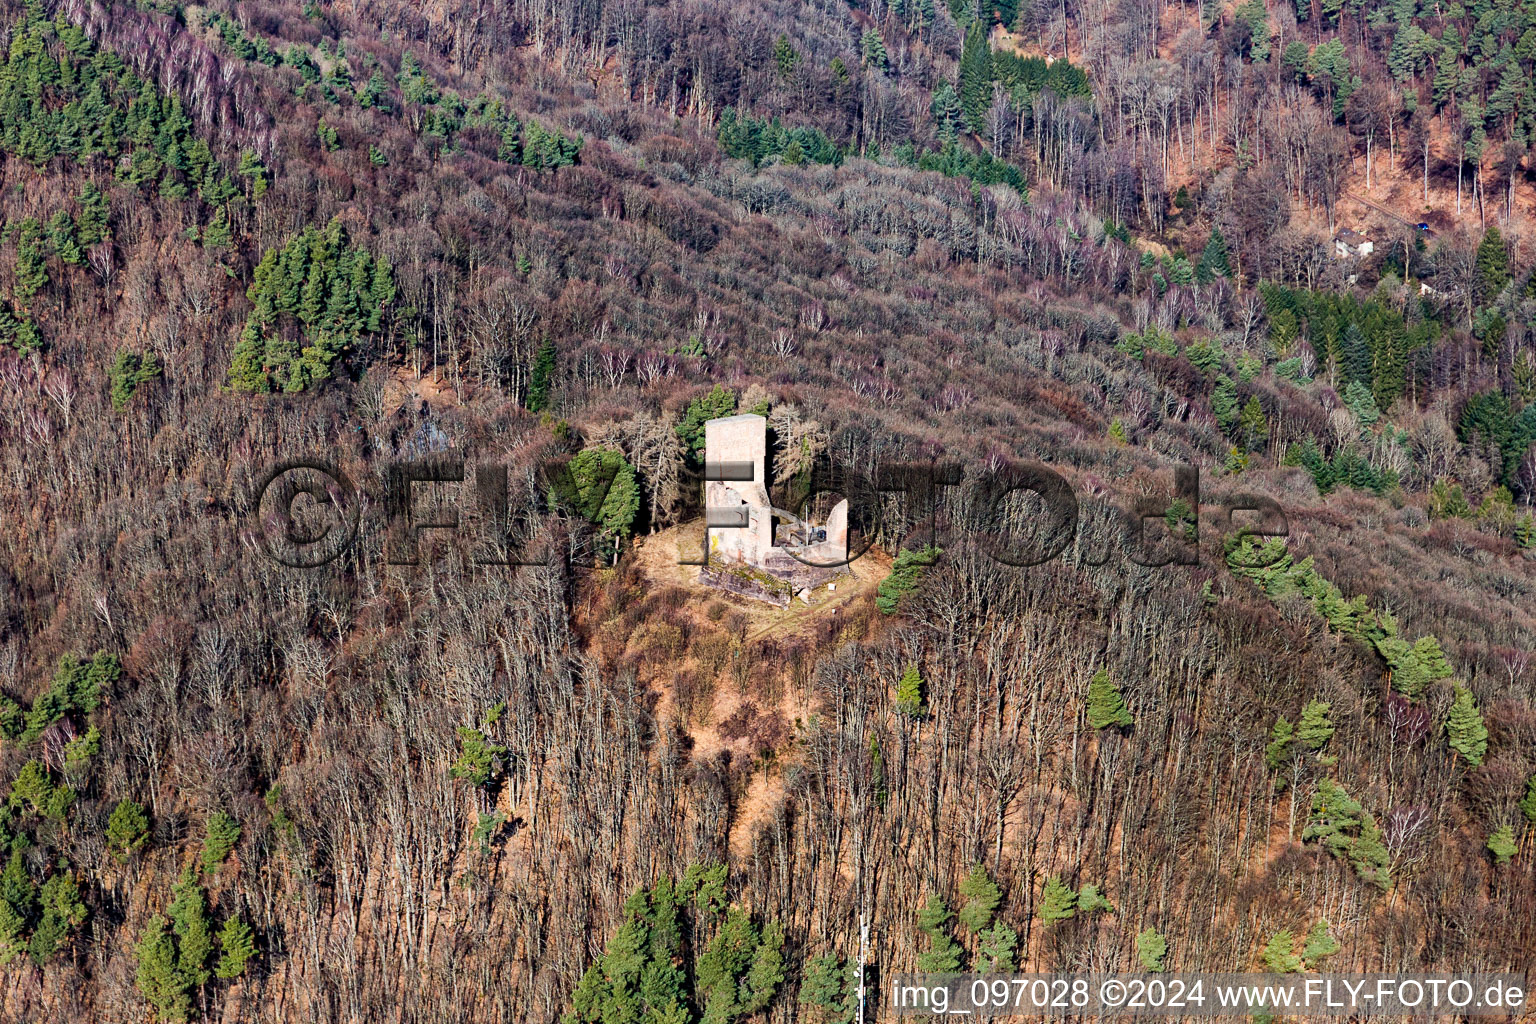 Ruins and vestiges of the former fortress Ramburg in Ramberg in the state Rhineland-Palatinate, Germany